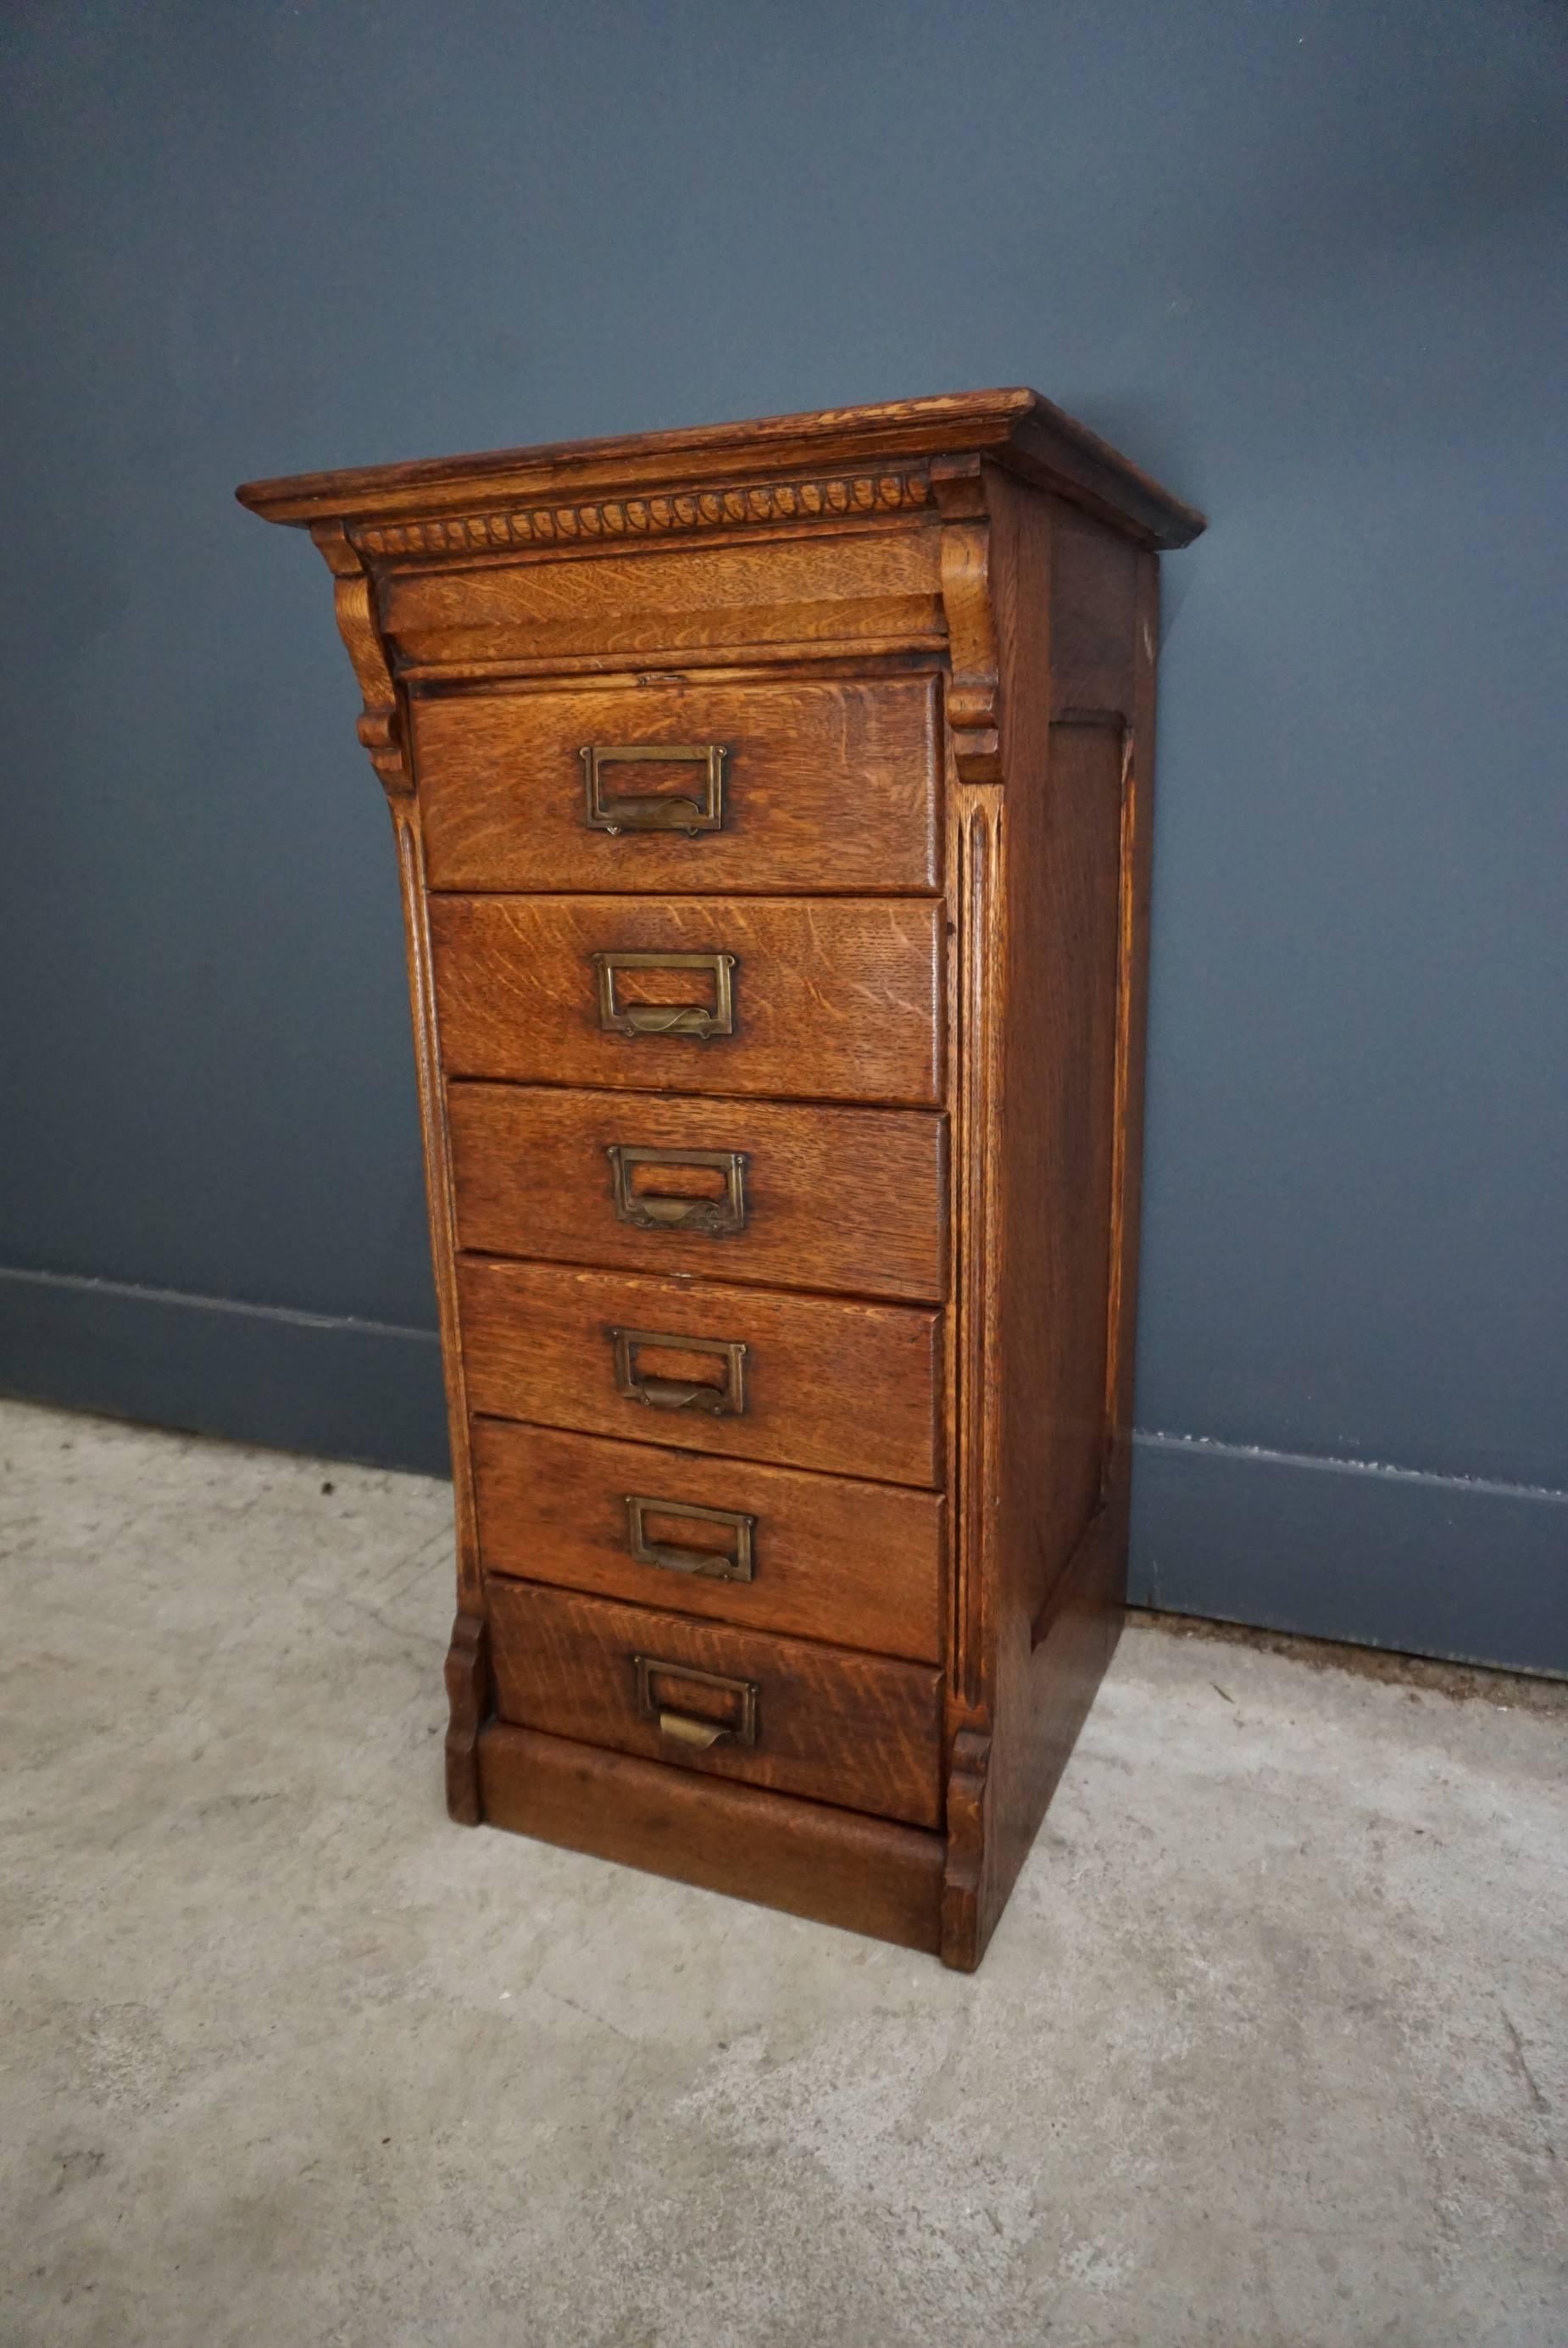 This oak filing cabinet was designed and made circa 1930 in The Netherlands. It features 6 drawers with brass hardware. The inside of the drawers measure: 32.5 x 26.5 x 7.5 cm.